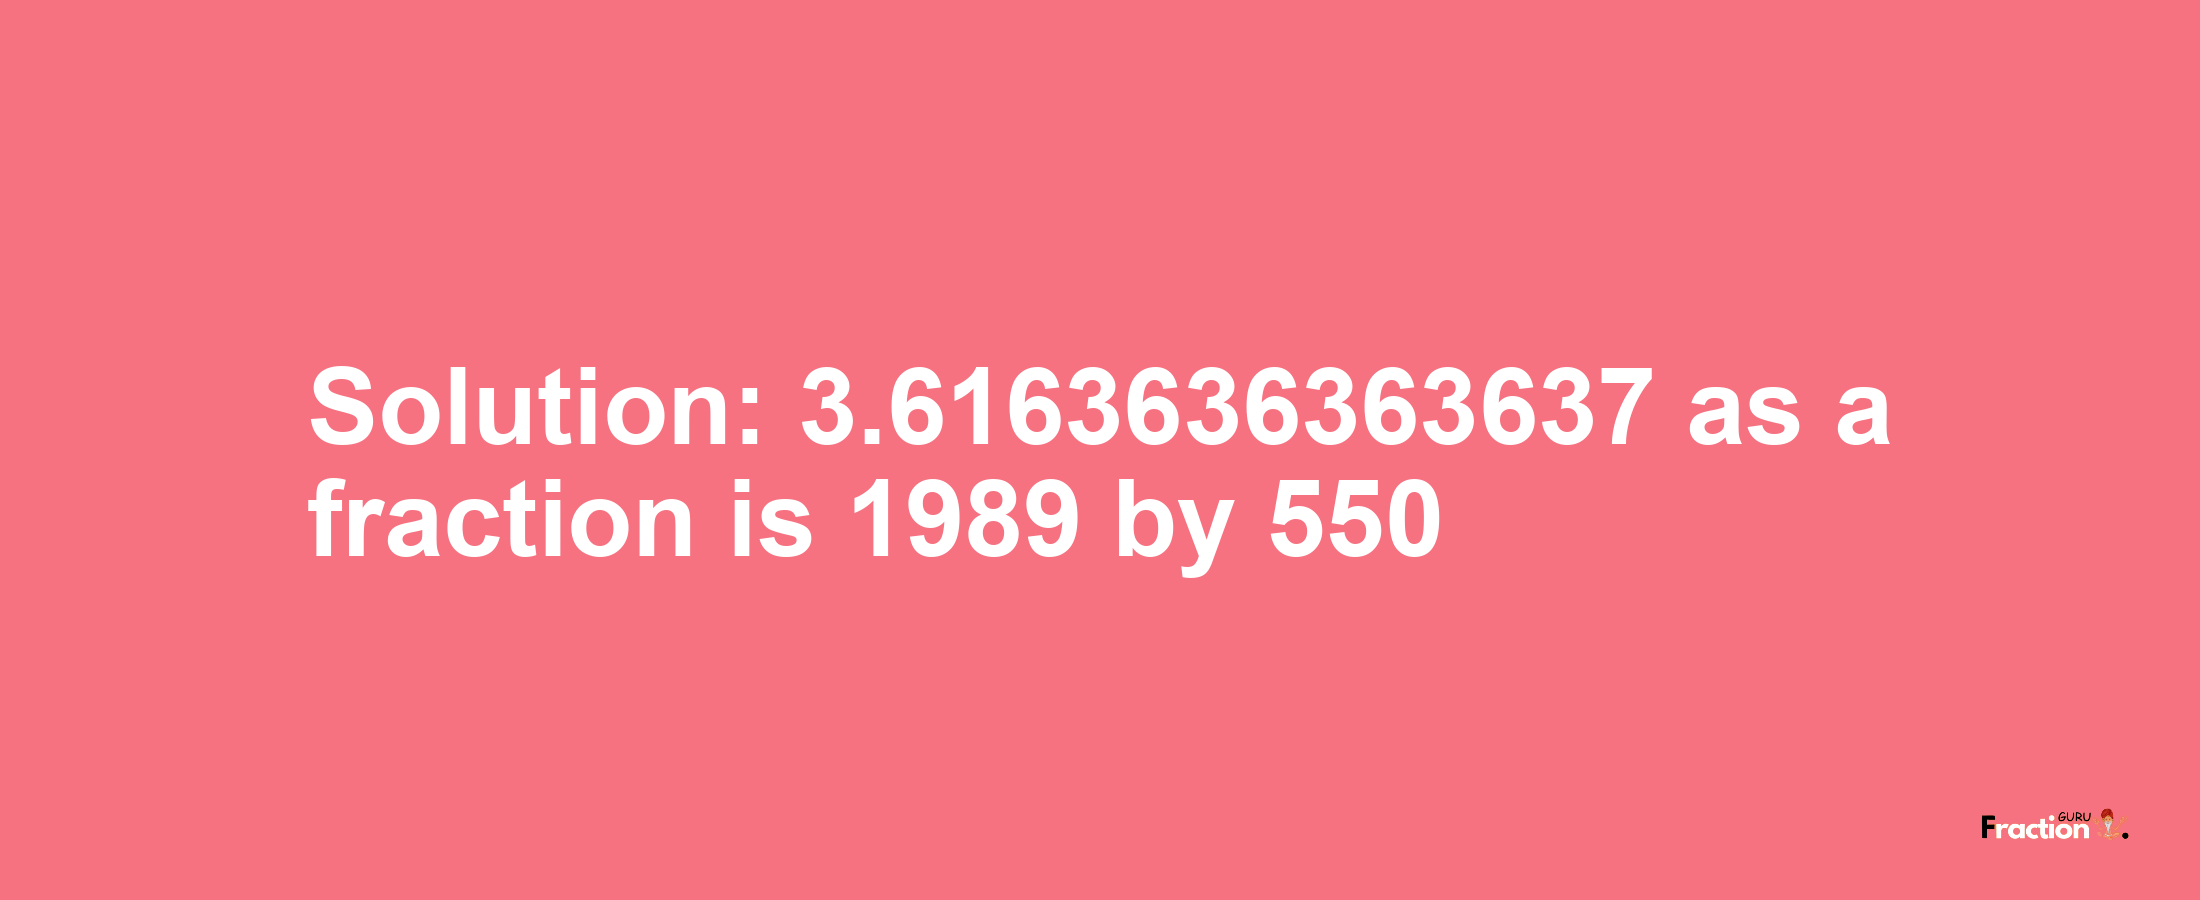 Solution:3.6163636363637 as a fraction is 1989/550